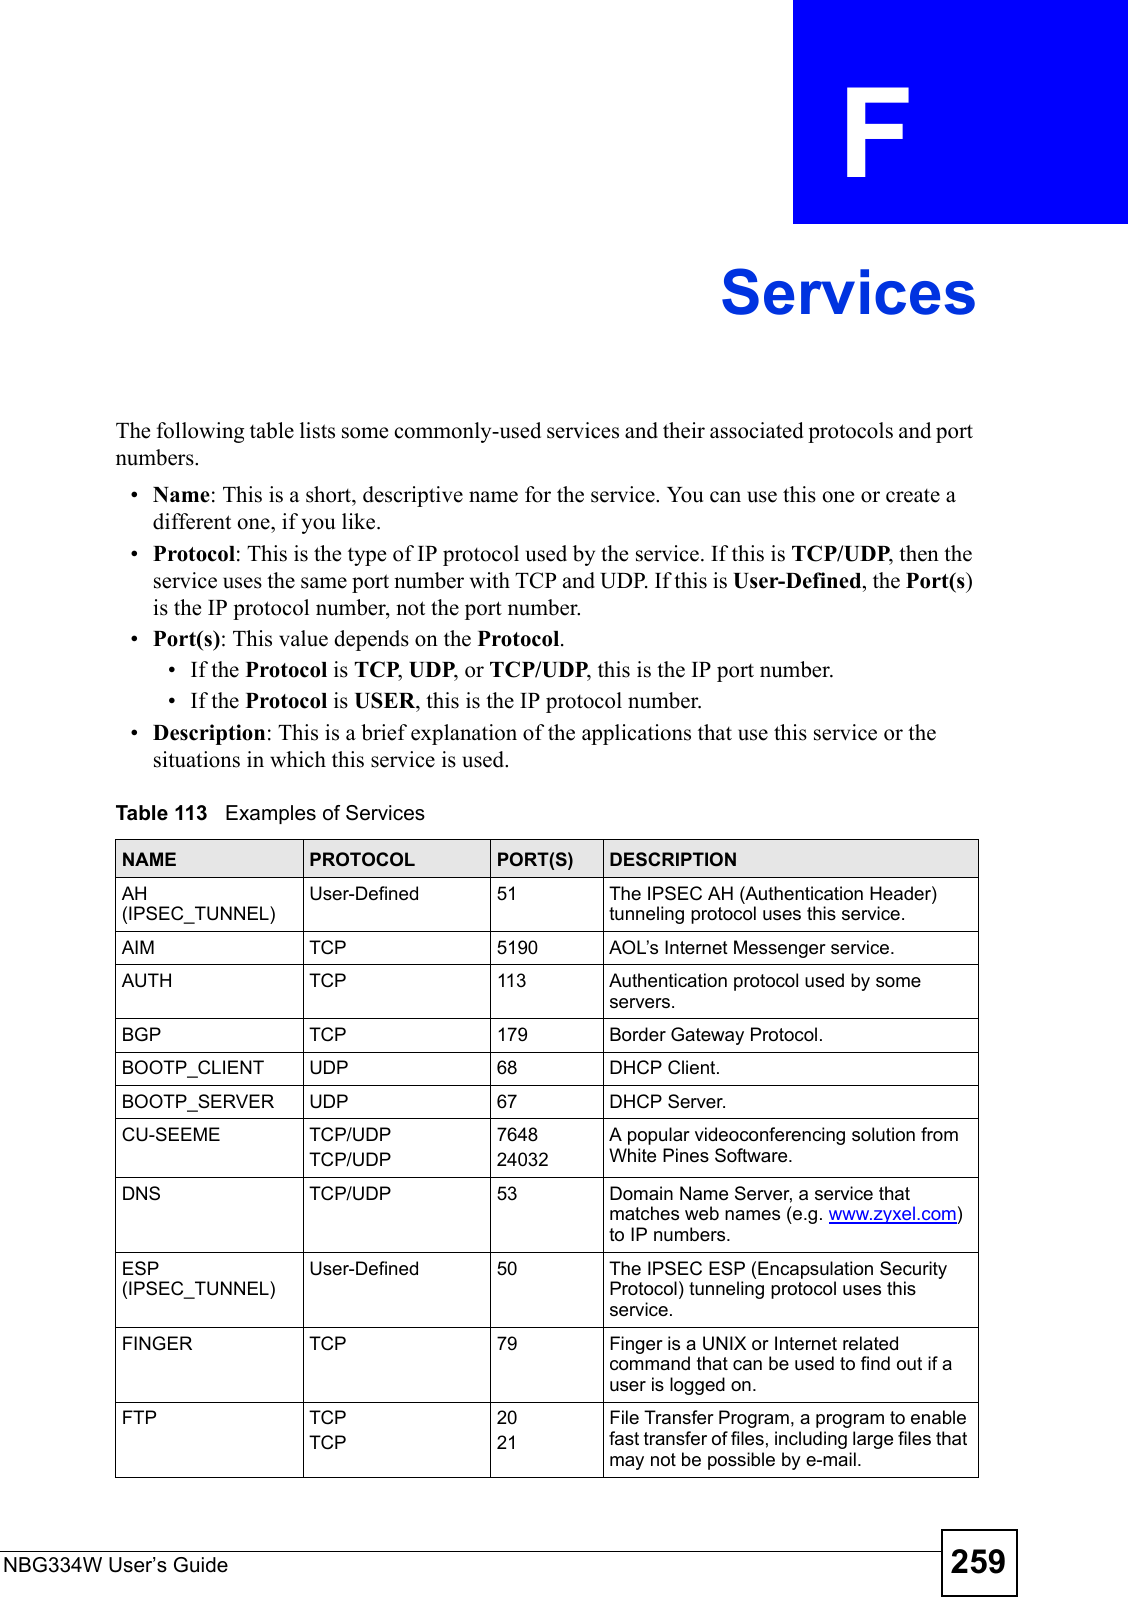 NBG334W User’s Guide 259APPENDIX  F ServicesThe following table lists some commonly-used services and their associated protocols and port numbers.•Name: This is a short, descriptive name for the service. You can use this one or create a different one, if you like.•Protocol: This is the type of IP protocol used by the service. If this is TCP/UDP, then the service uses the same port number with TCP and UDP. If this is User-Defined, the Port(s) is the IP protocol number, not the port number.•Port(s): This value depends on the Protocol.• If the Protocol is TCP, UDP, or TCP/UDP, this is the IP port number.• If the Protocol is USER, this is the IP protocol number.•Description: This is a brief explanation of the applications that use this service or the situations in which this service is used.Table 113   Examples of ServicesNAME PROTOCOL PORT(S) DESCRIPTIONAH (IPSEC_TUNNEL)User-Defined 51 The IPSEC AH (Authentication Header) tunneling protocol uses this service.AIM TCP 5190 AOL’s Internet Messenger service.AUTH TCP 113 Authentication protocol used by some servers.BGP TCP 179 Border Gateway Protocol.BOOTP_CLIENT UDP 68 DHCP Client.BOOTP_SERVER UDP 67 DHCP Server.CU-SEEME TCP/UDPTCP/UDP 764824032A popular videoconferencing solution from White Pines Software.DNS TCP/UDP 53 Domain Name Server, a service that matches web names (e.g. www.zyxel.com) to IP numbers.ESP (IPSEC_TUNNEL)User-Defined 50 The IPSEC ESP (Encapsulation Security Protocol) tunneling protocol uses this service.FINGER TCP 79 Finger is a UNIX or Internet related command that can be used to find out if a user is logged on.FTP TCPTCP2021File Transfer Program, a program to enable fast transfer of files, including large files that may not be possible by e-mail.